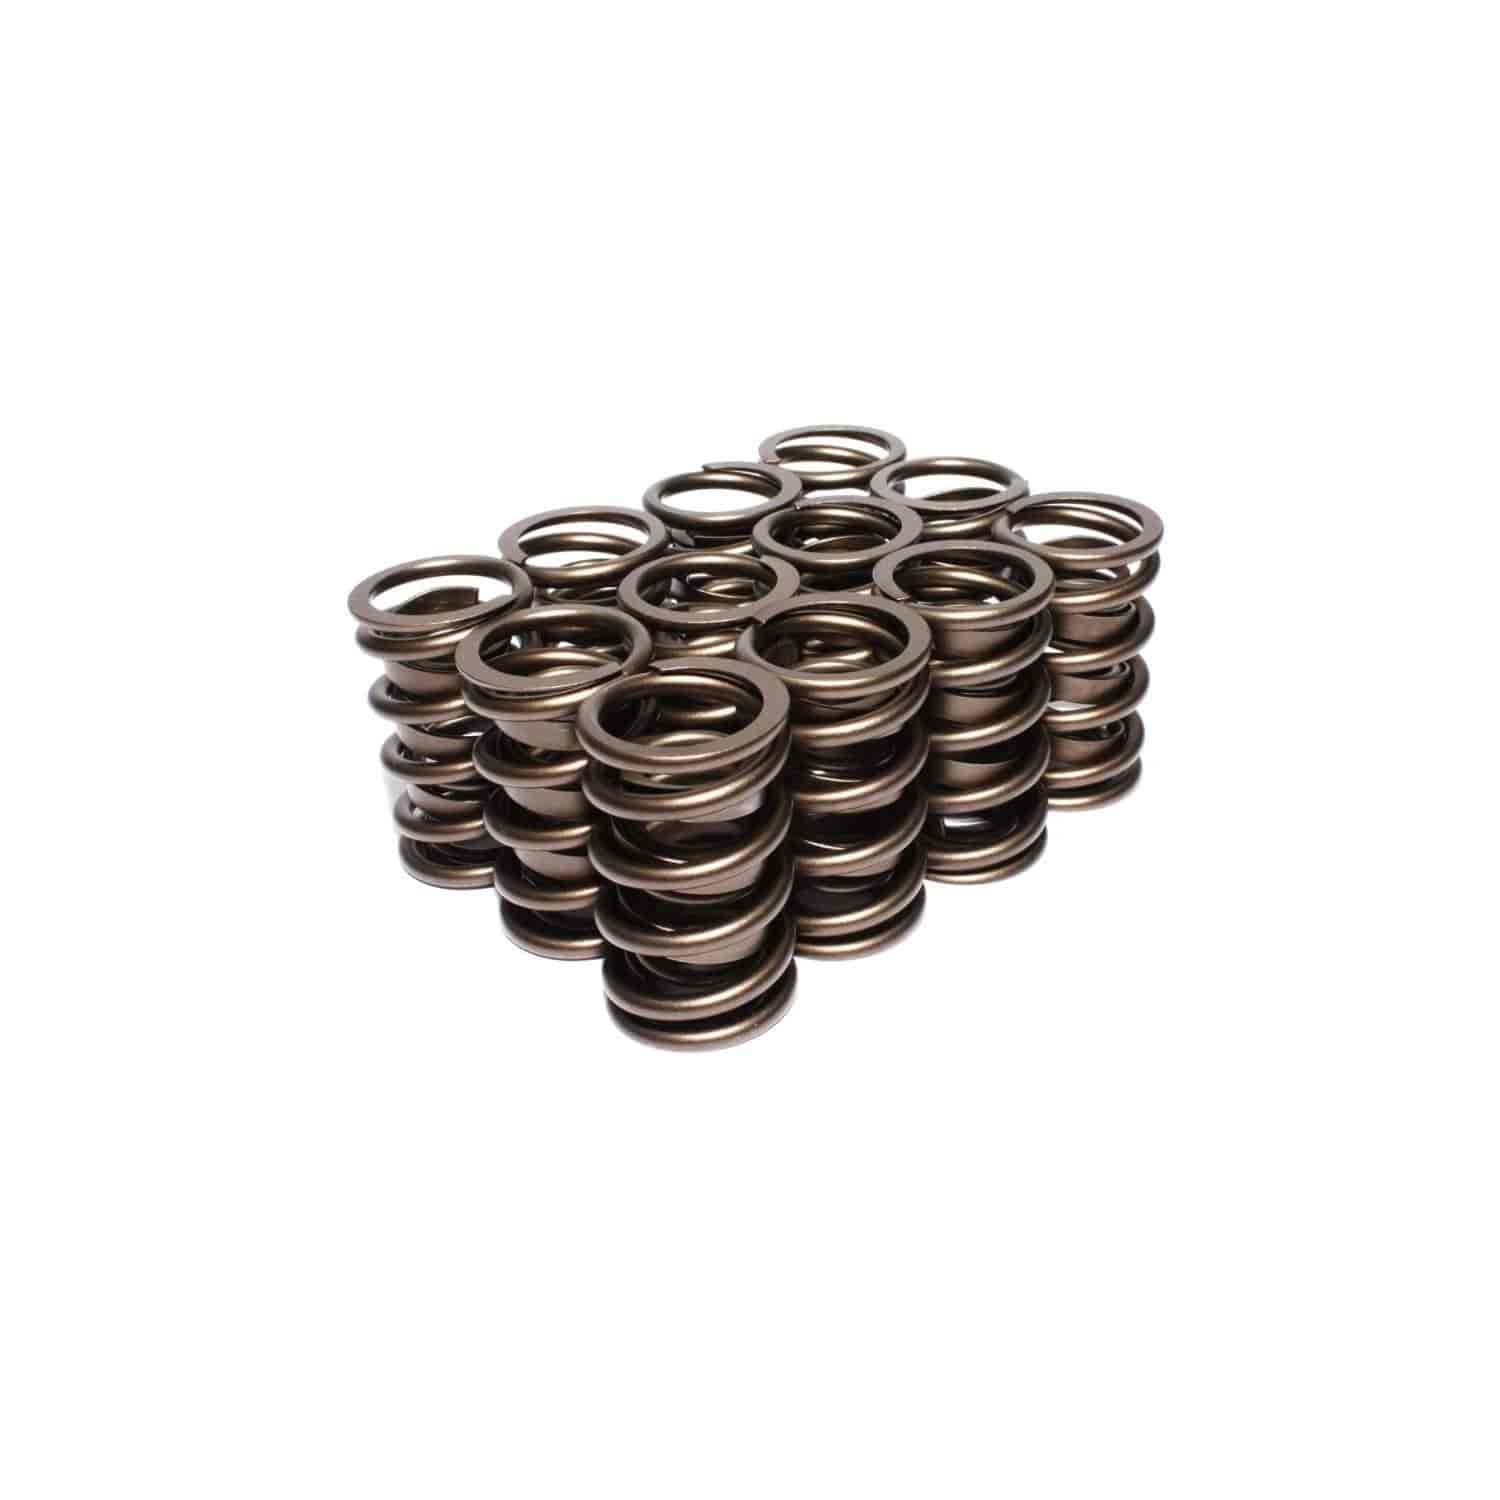 Dual Valve Springs Outer Spring O.D.: 1.384 in.